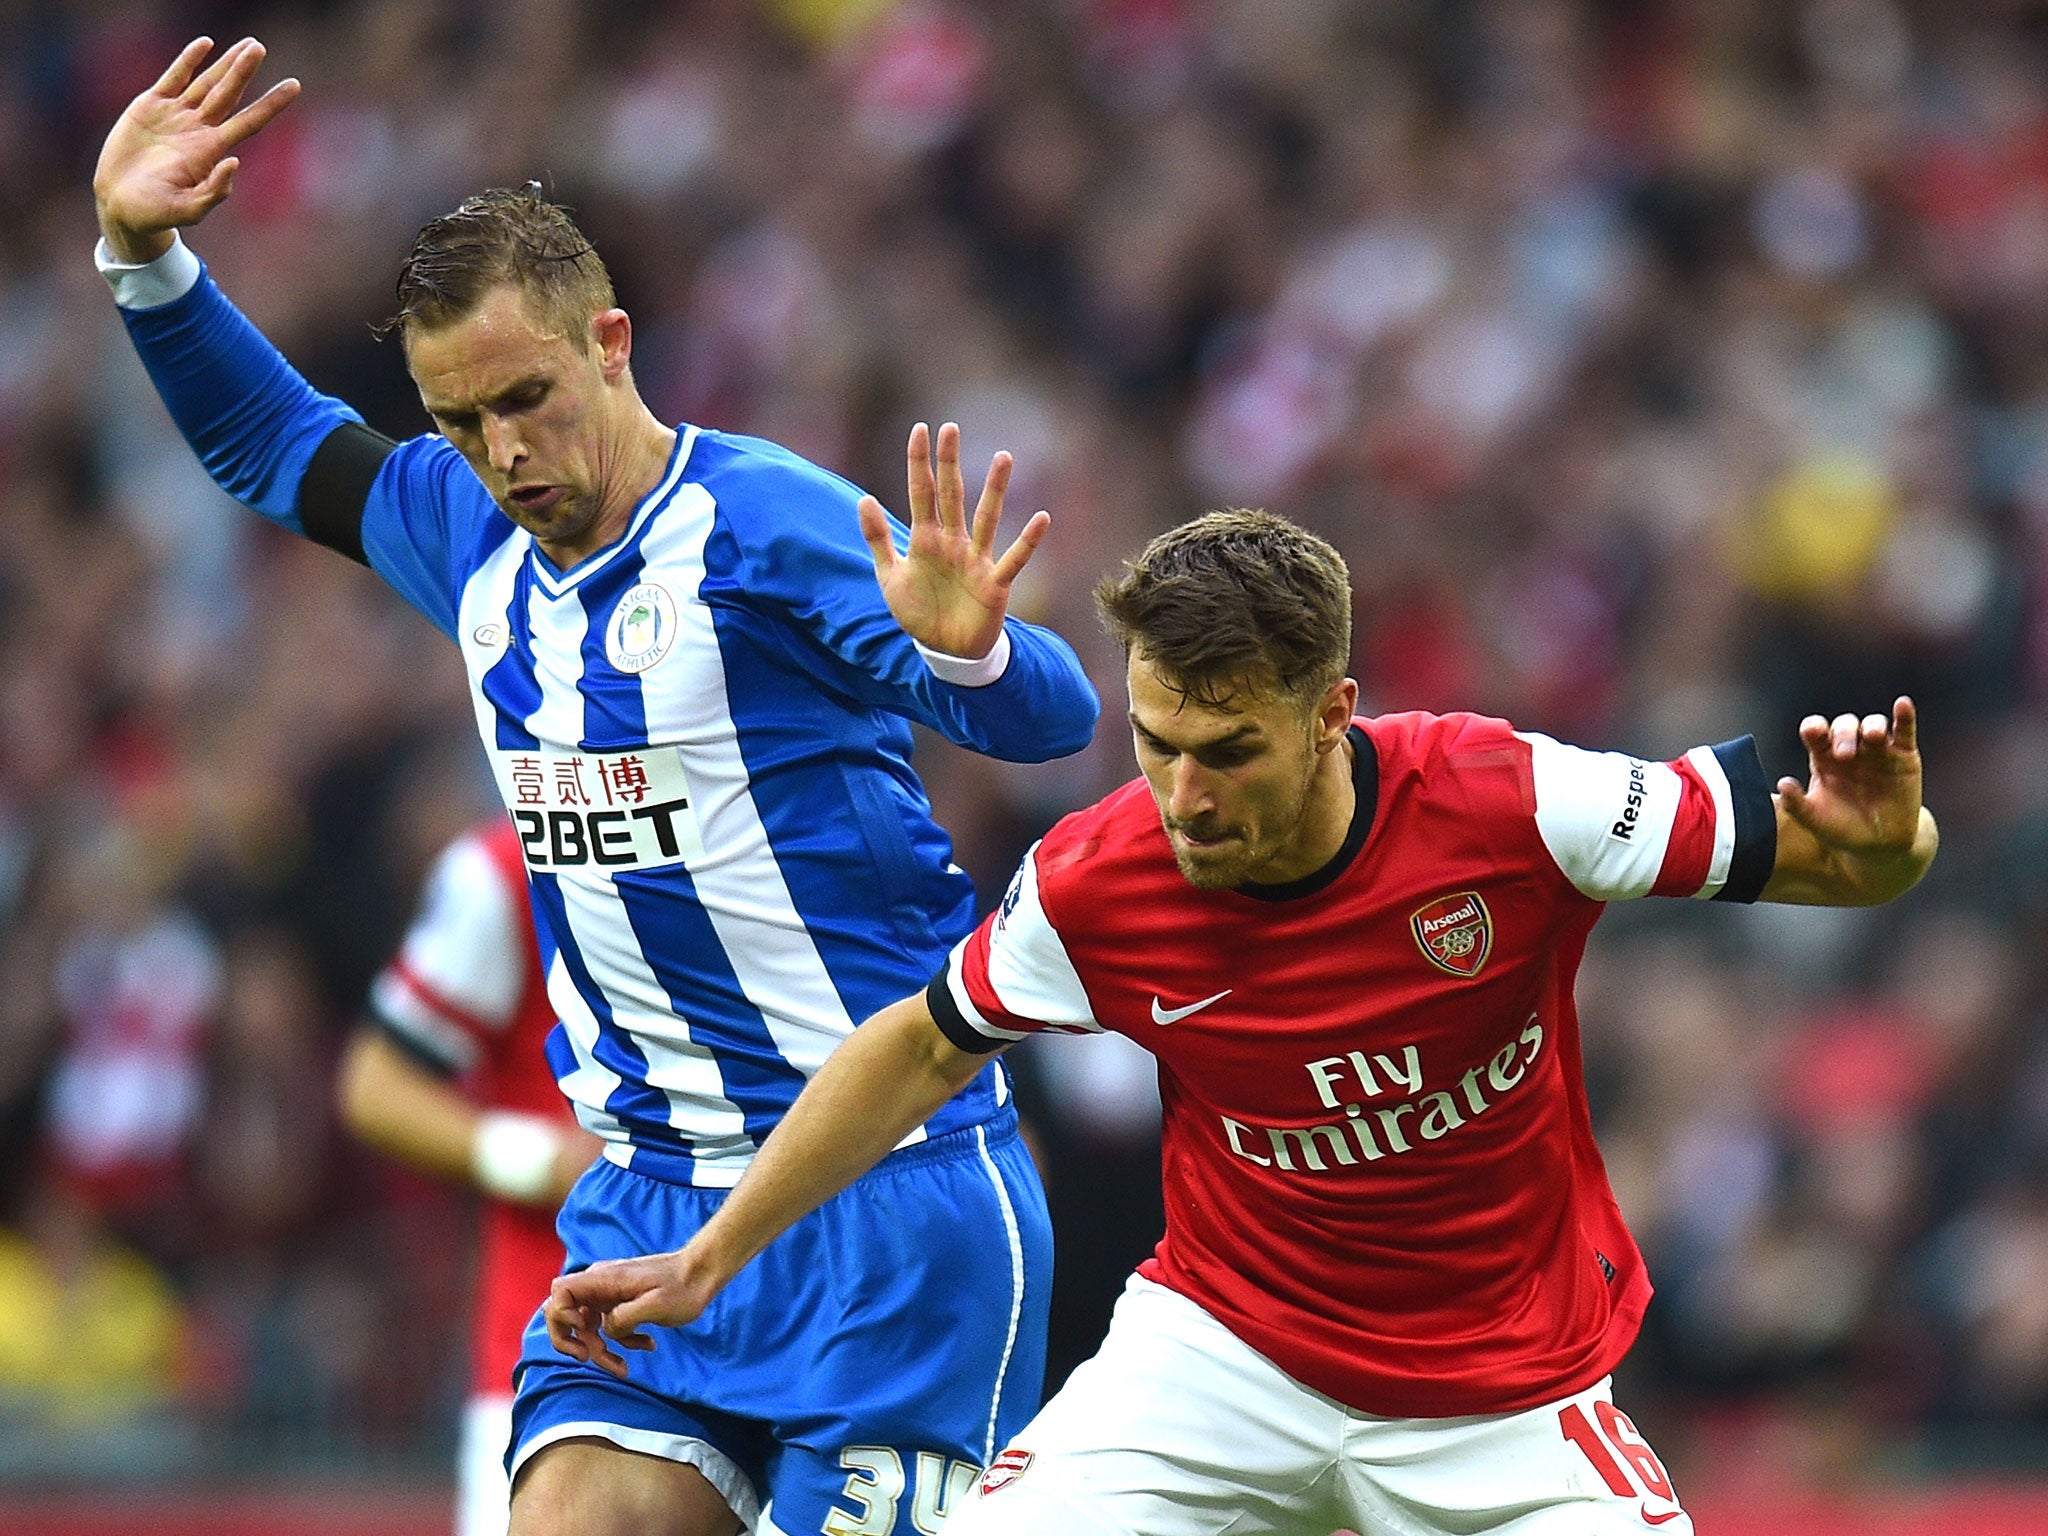 Collison featured in Wigan's FA Cup semi-final defeat to Arsenal in 2014